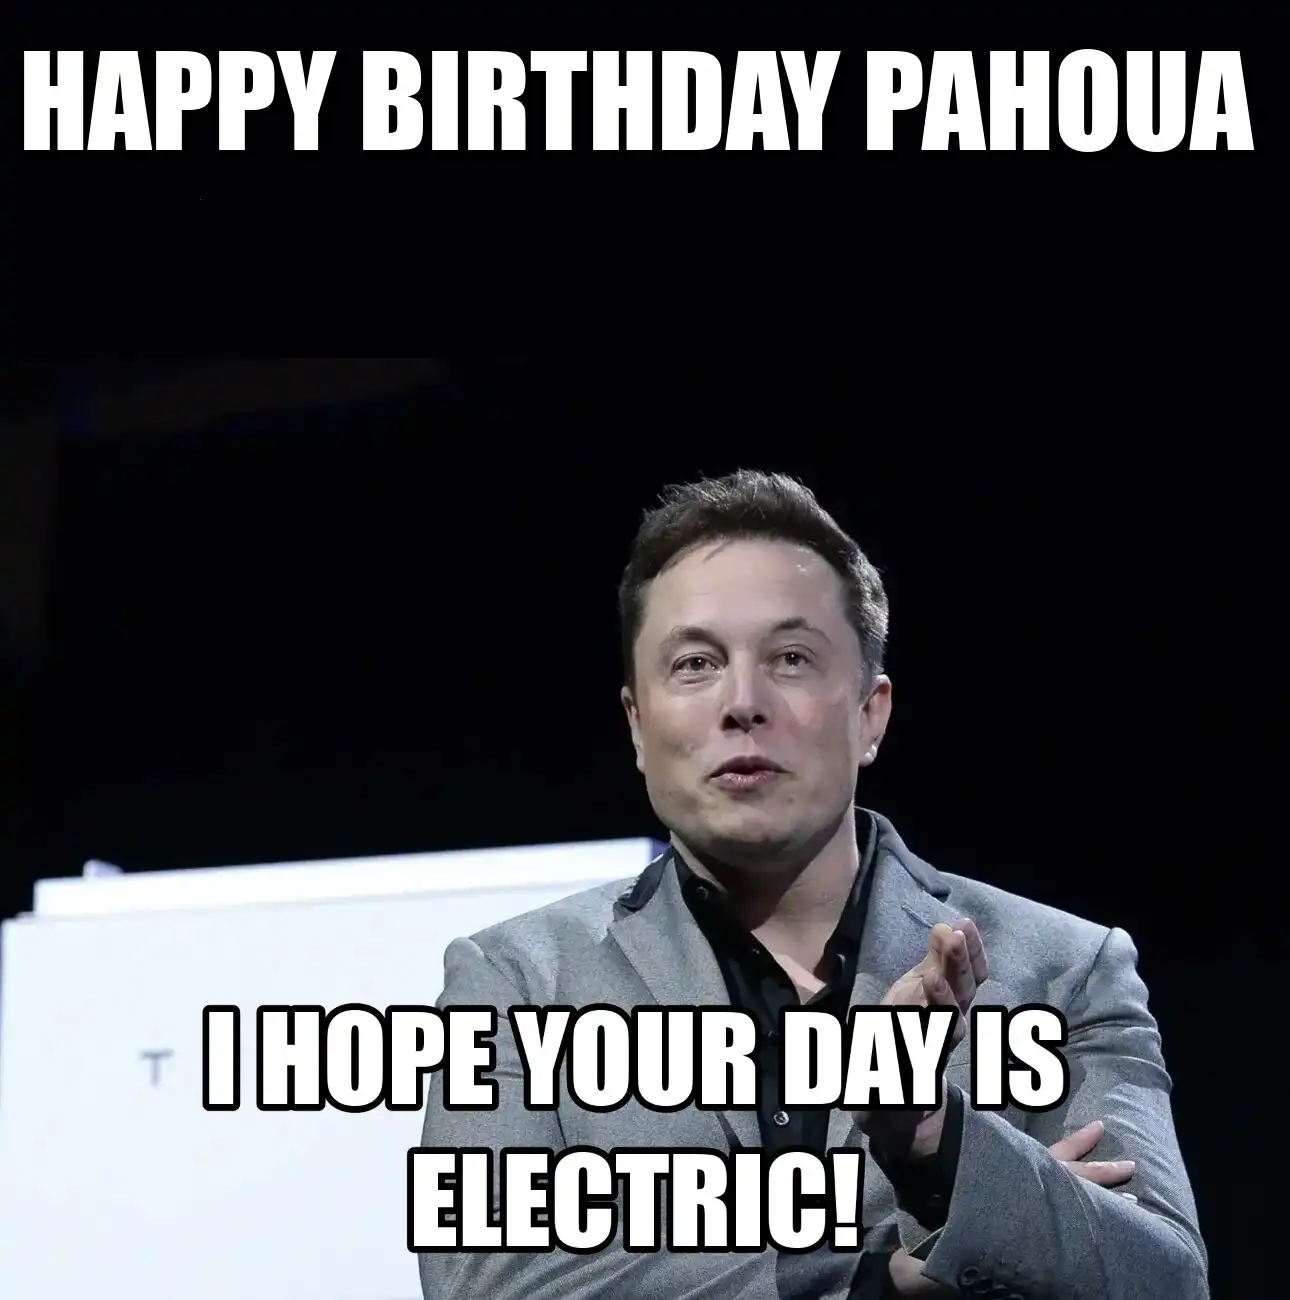 Happy Birthday Pahoua I Hope Your Day Is Electric Meme